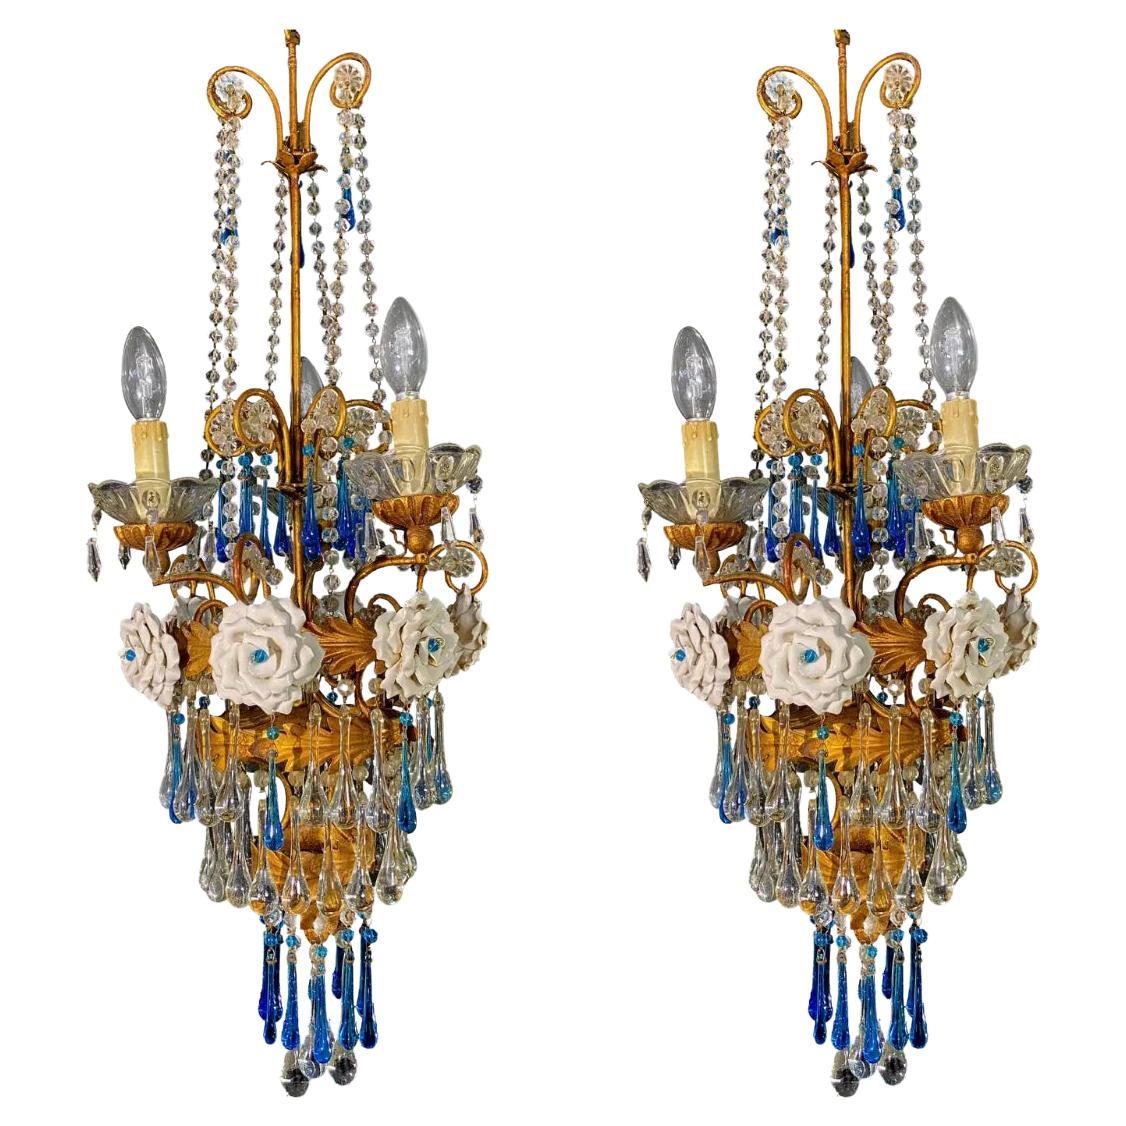 Pair of Lovely Chandeliers with White Roses and Blue Drops, Murano, 1950s For Sale 13